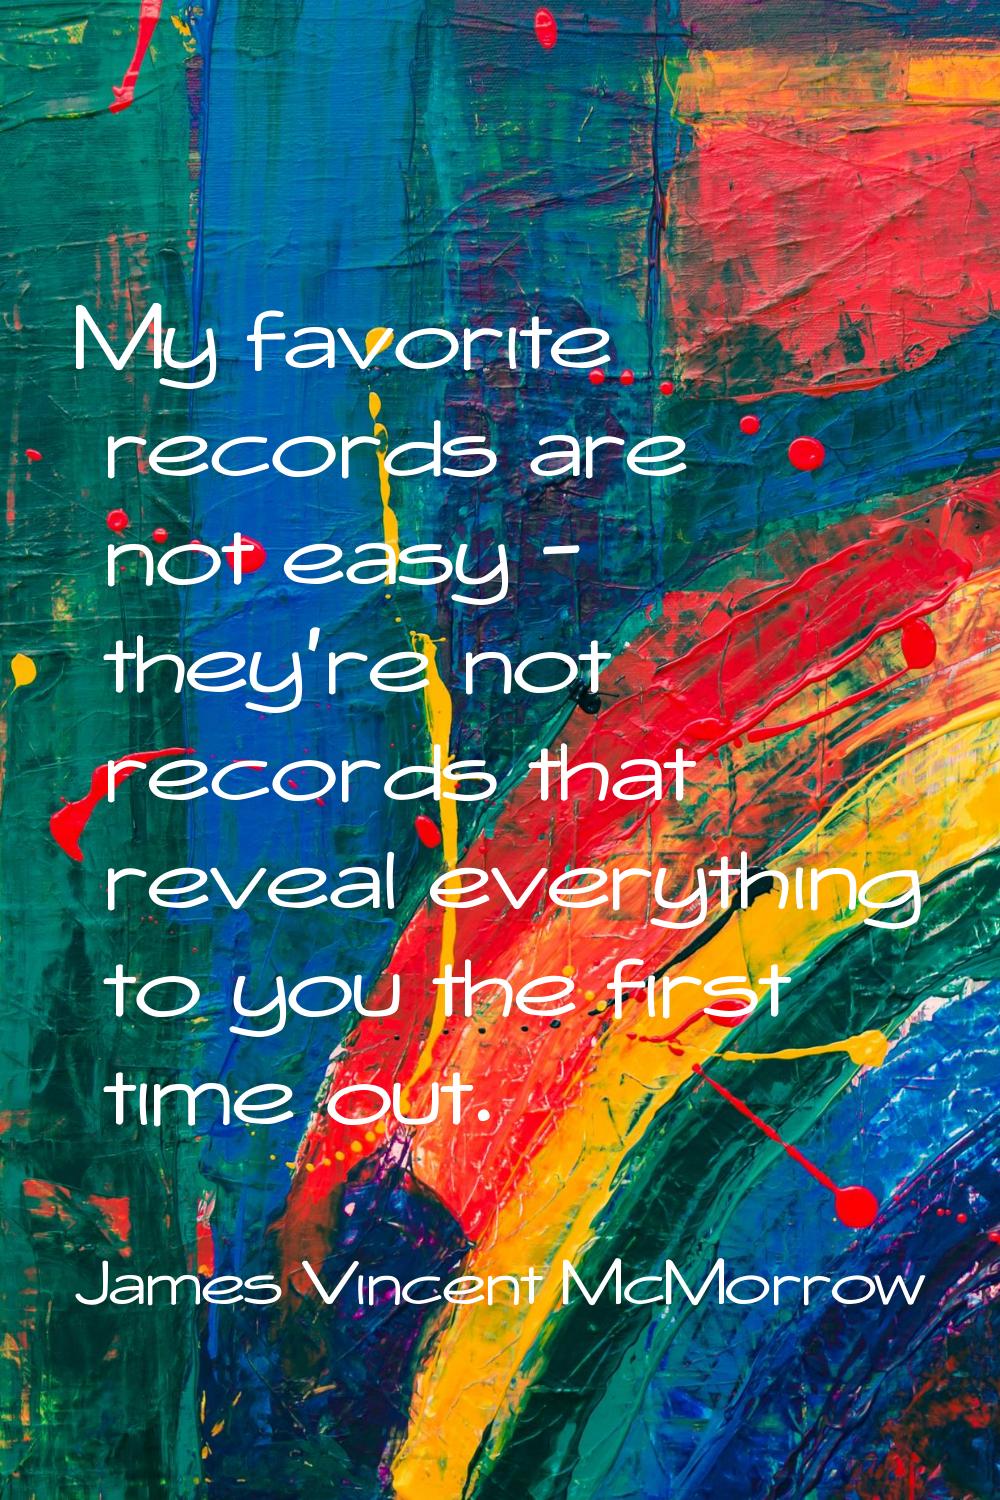 My favorite records are not easy - they're not records that reveal everything to you the first time